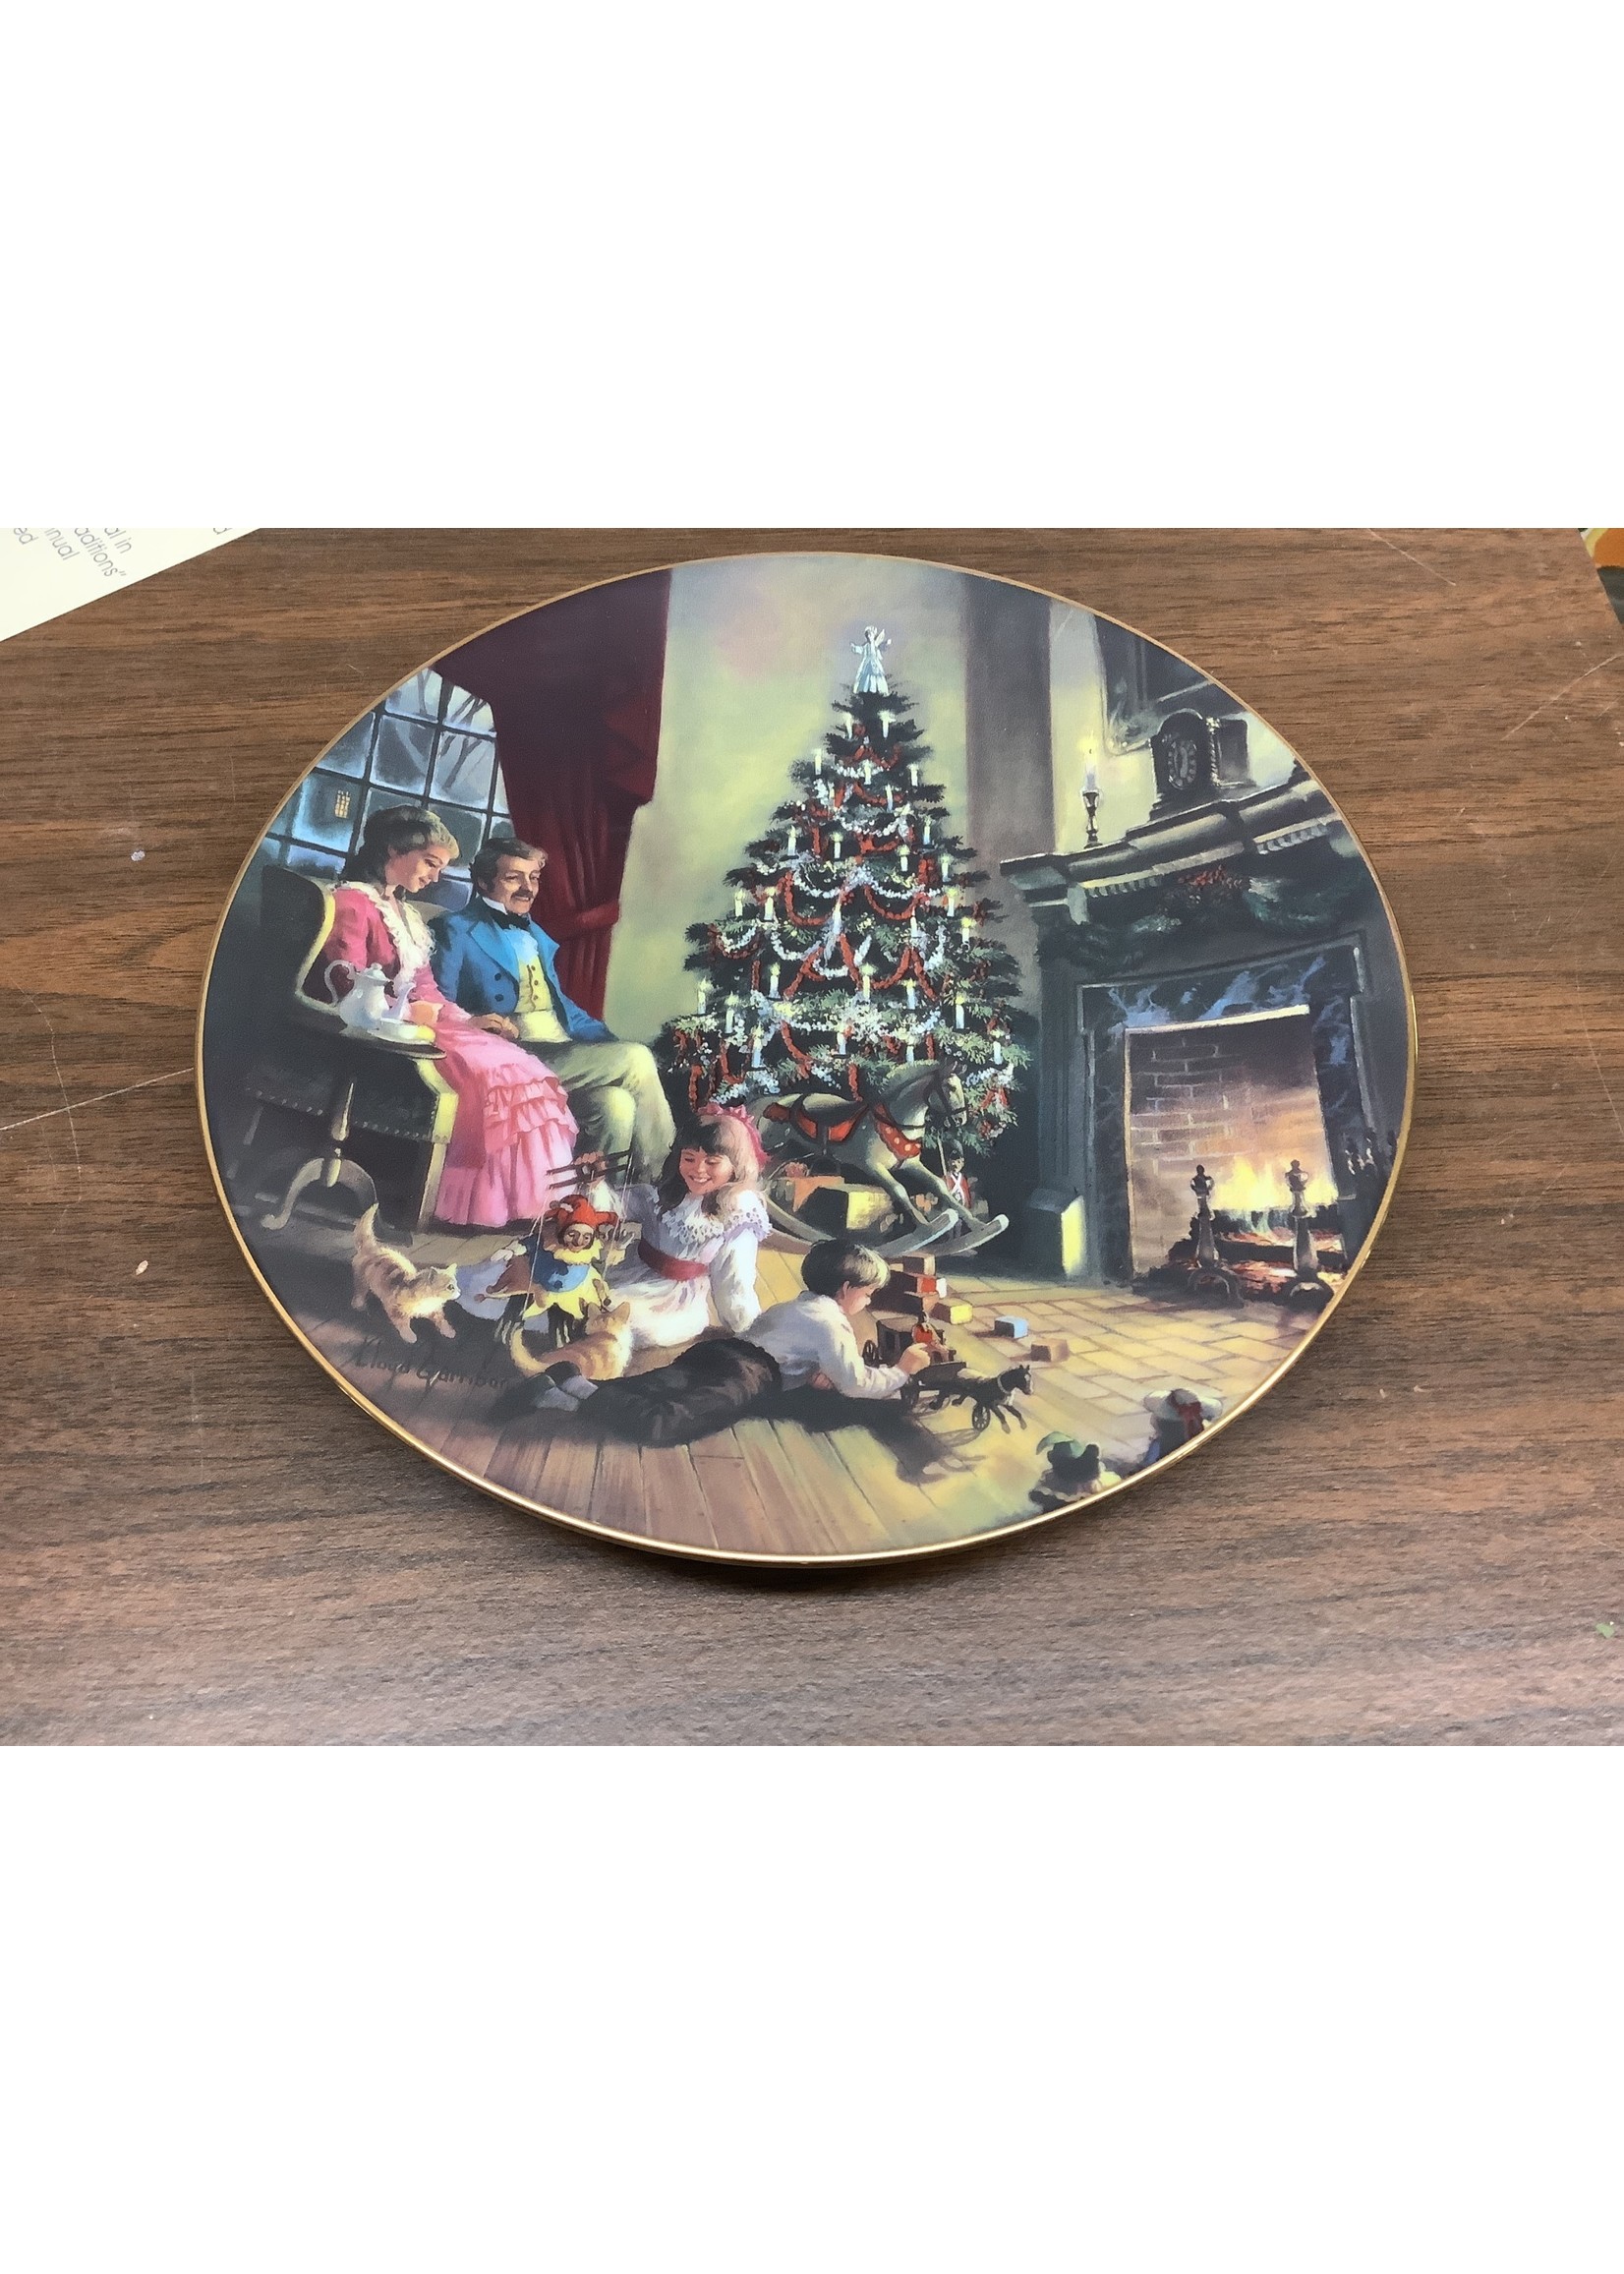 The Bradford Exchange Collectors Plate (1992) “ Family Traditions” Bradex-No. 84- G20-2.6